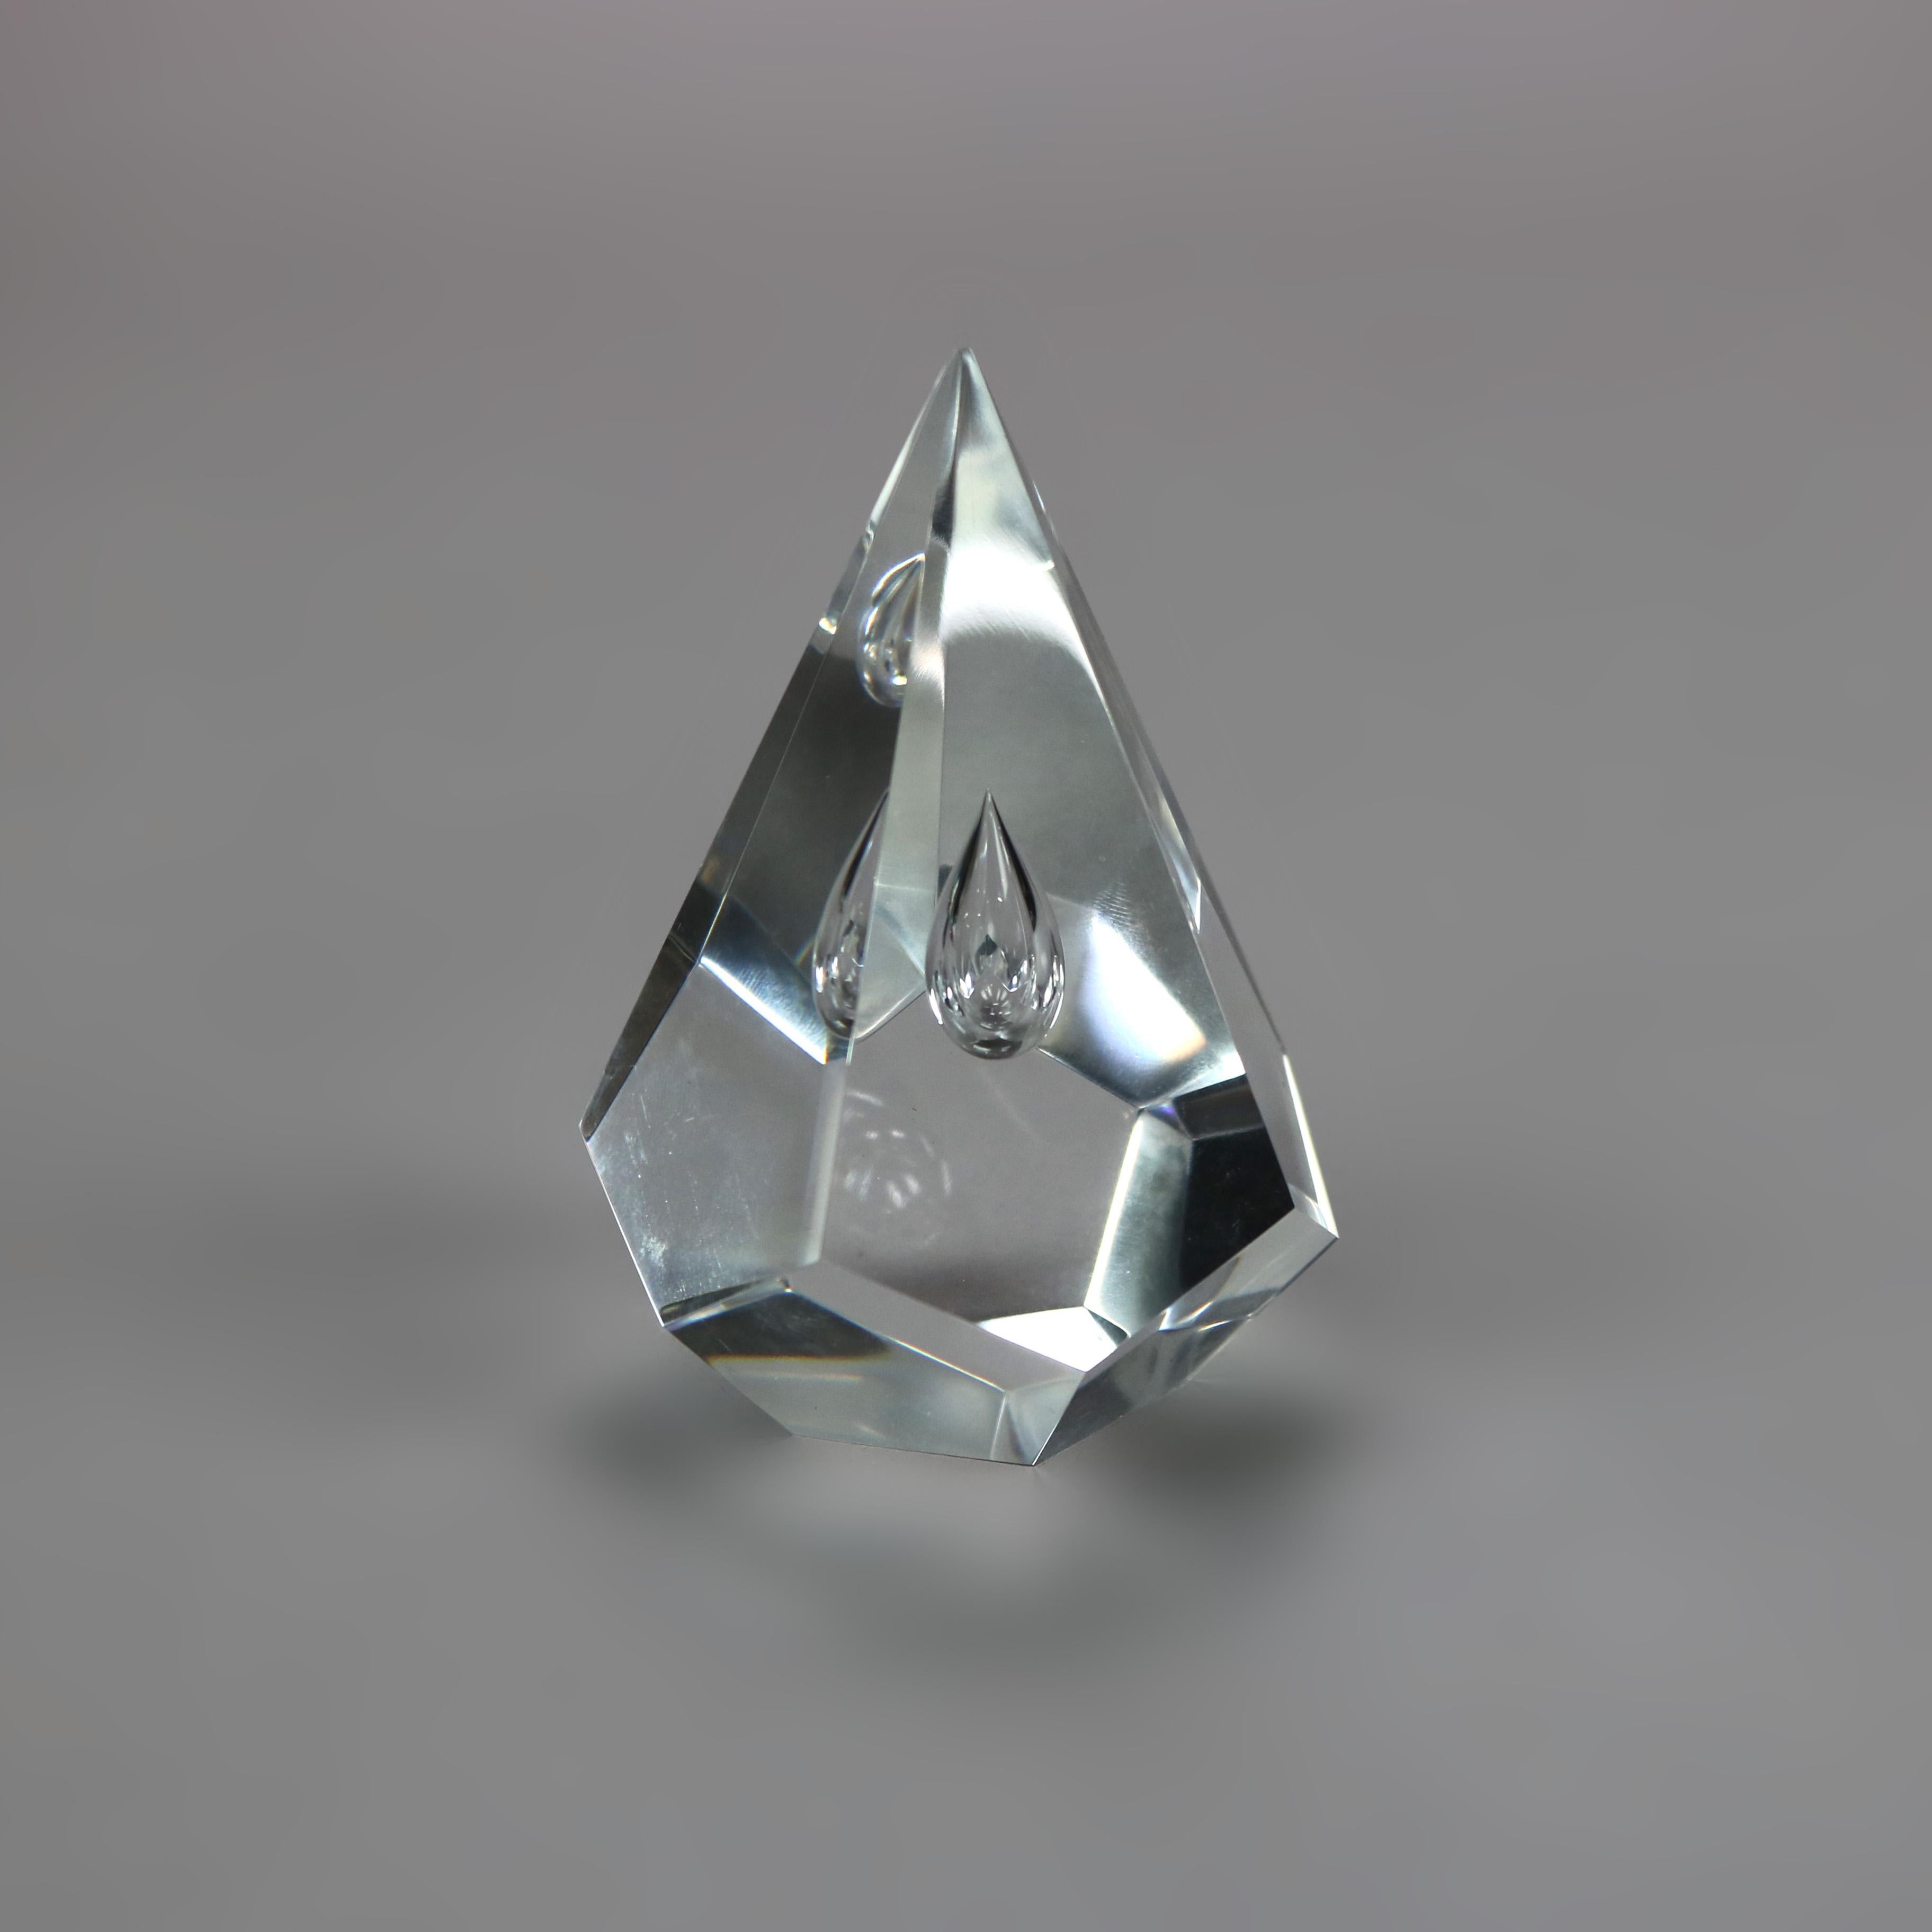 Steuben Glass Pyramid Paperweight, Signed, 20th C 13